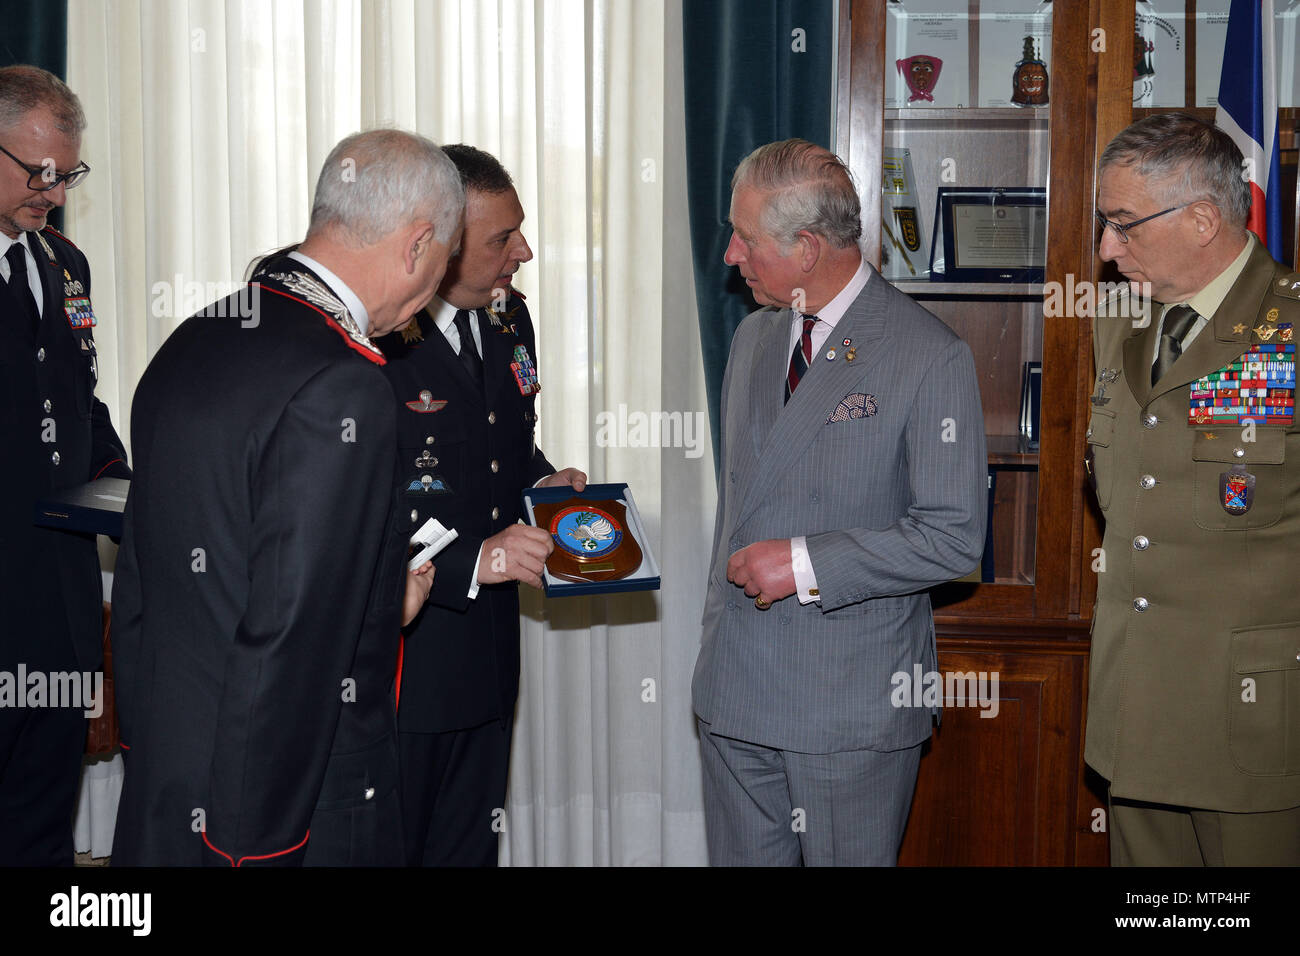 Brig. Gen. Giovanni Pietro Barbano, Center of Excellence for Stability Police Units (CoESPU) director (center), presents Carabinieri CoESPU crest to His Royal Highness, Prince Charles, Prince of Wales, during visit at Center of Excellence for Stability Police Units (CoESPU) Vicenza, Italy, April 1, 2017. (U.S. Army Photo by Visual Information Specialist Paolo Bovo/released) Stock Photo